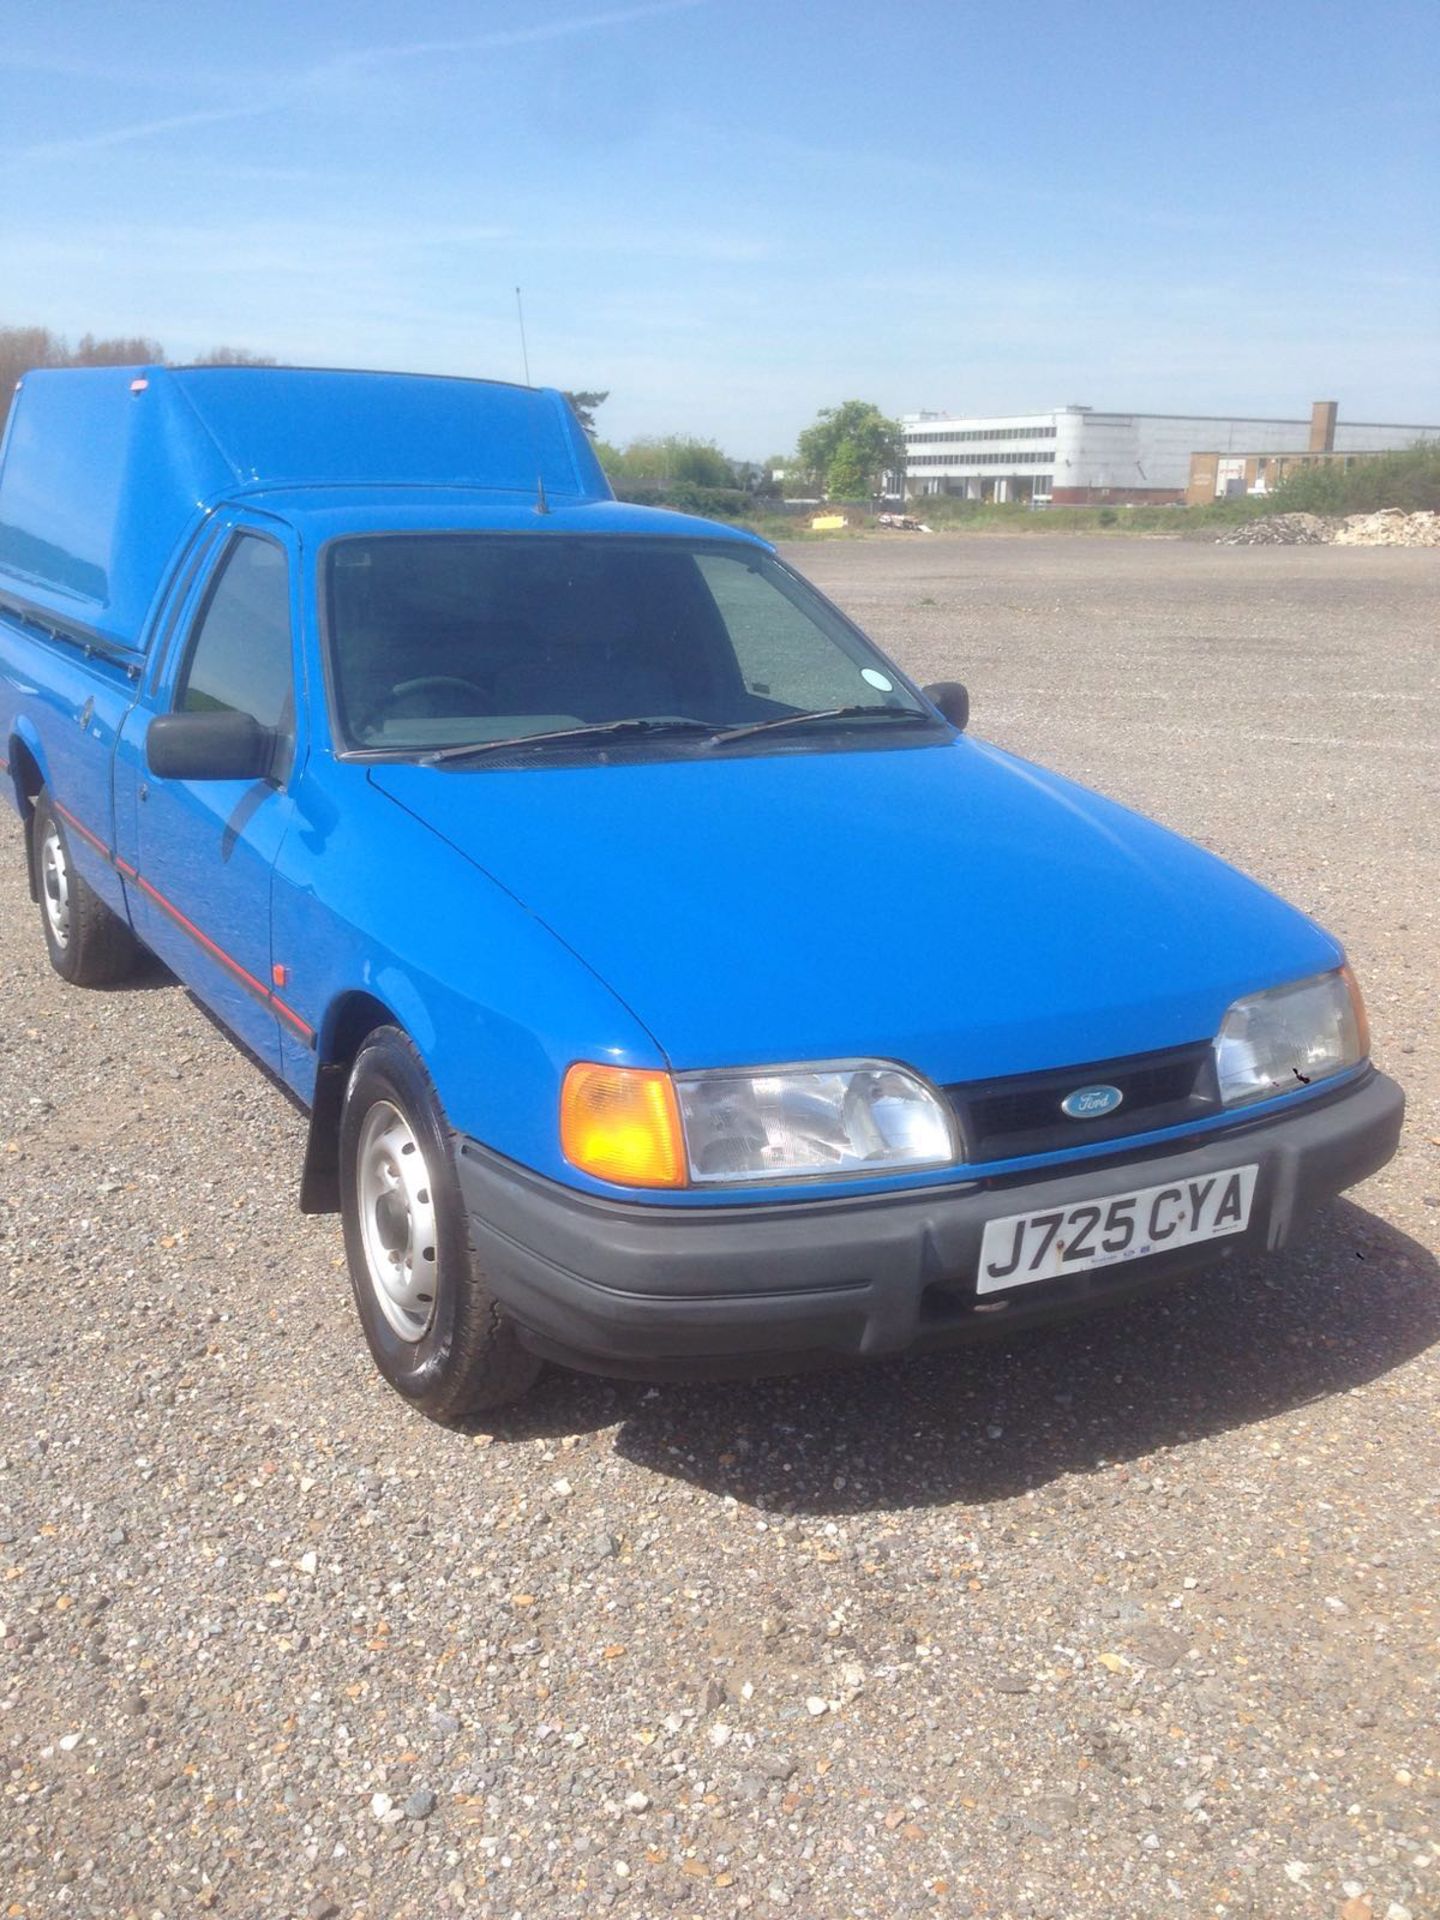 Ford P100 pickup, 1.8 turbo diesel 1991/J 39,000 miles with truckman top 2 owners - Image 4 of 14